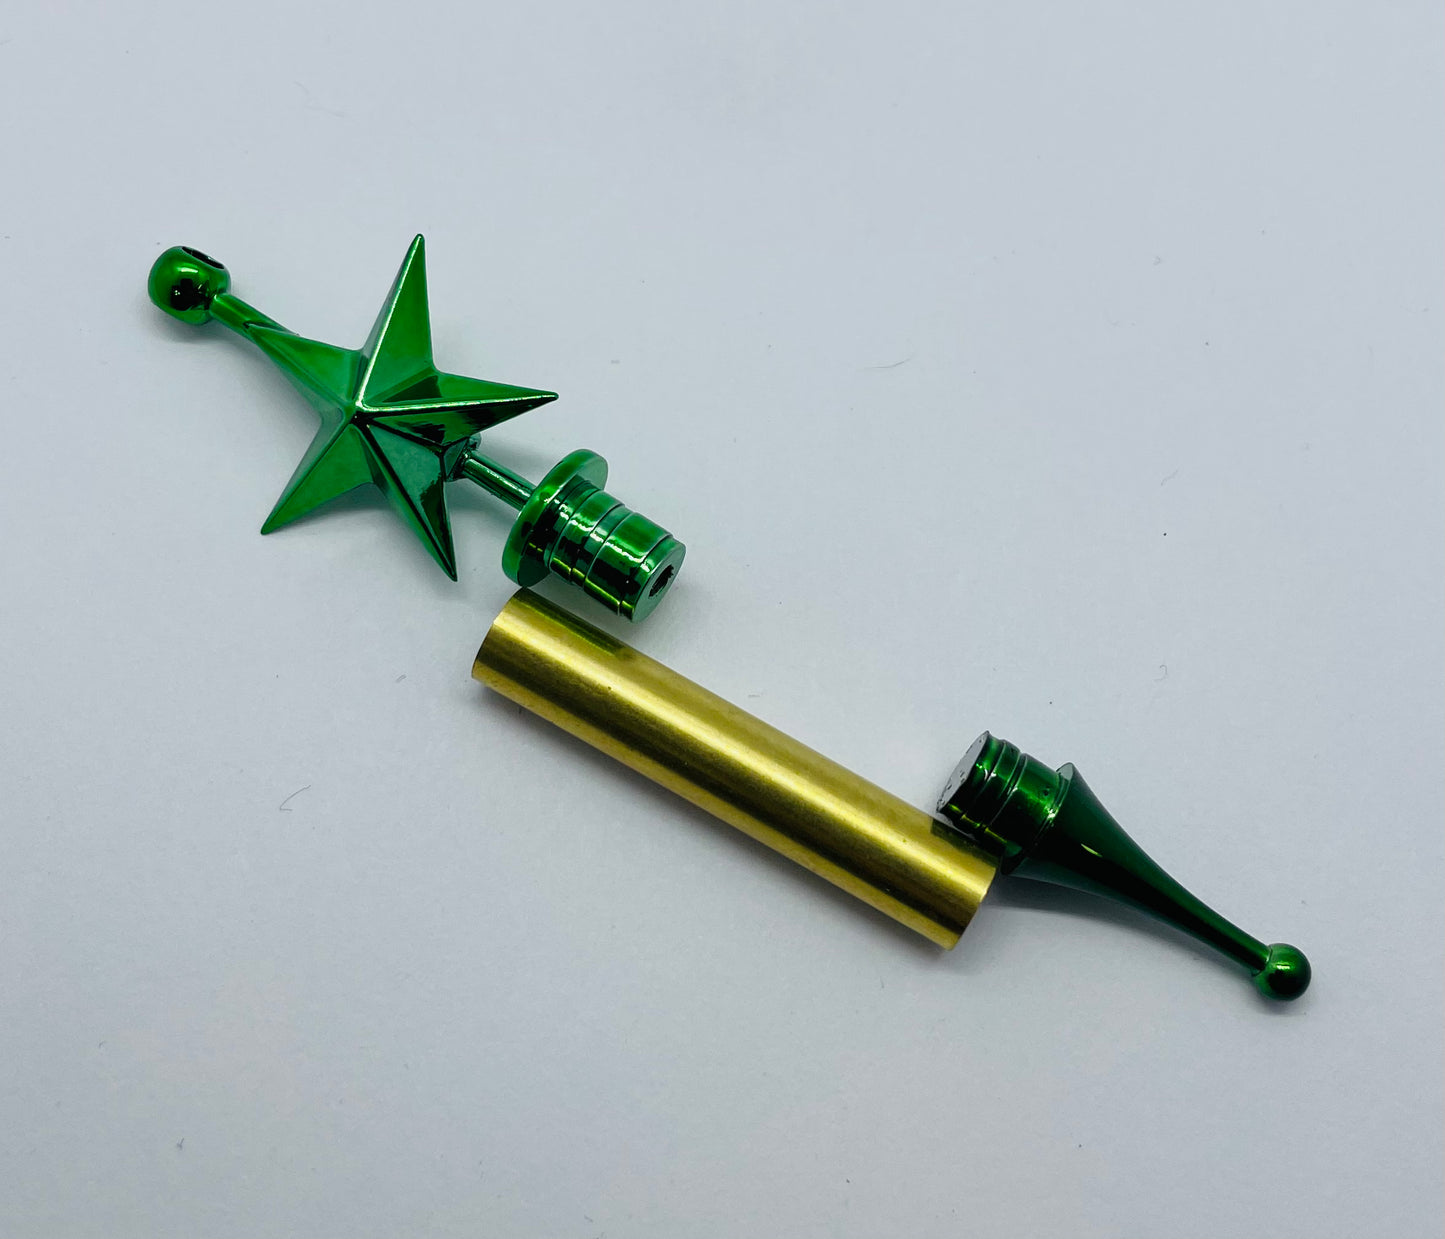 Star Christmas Ornament project kit